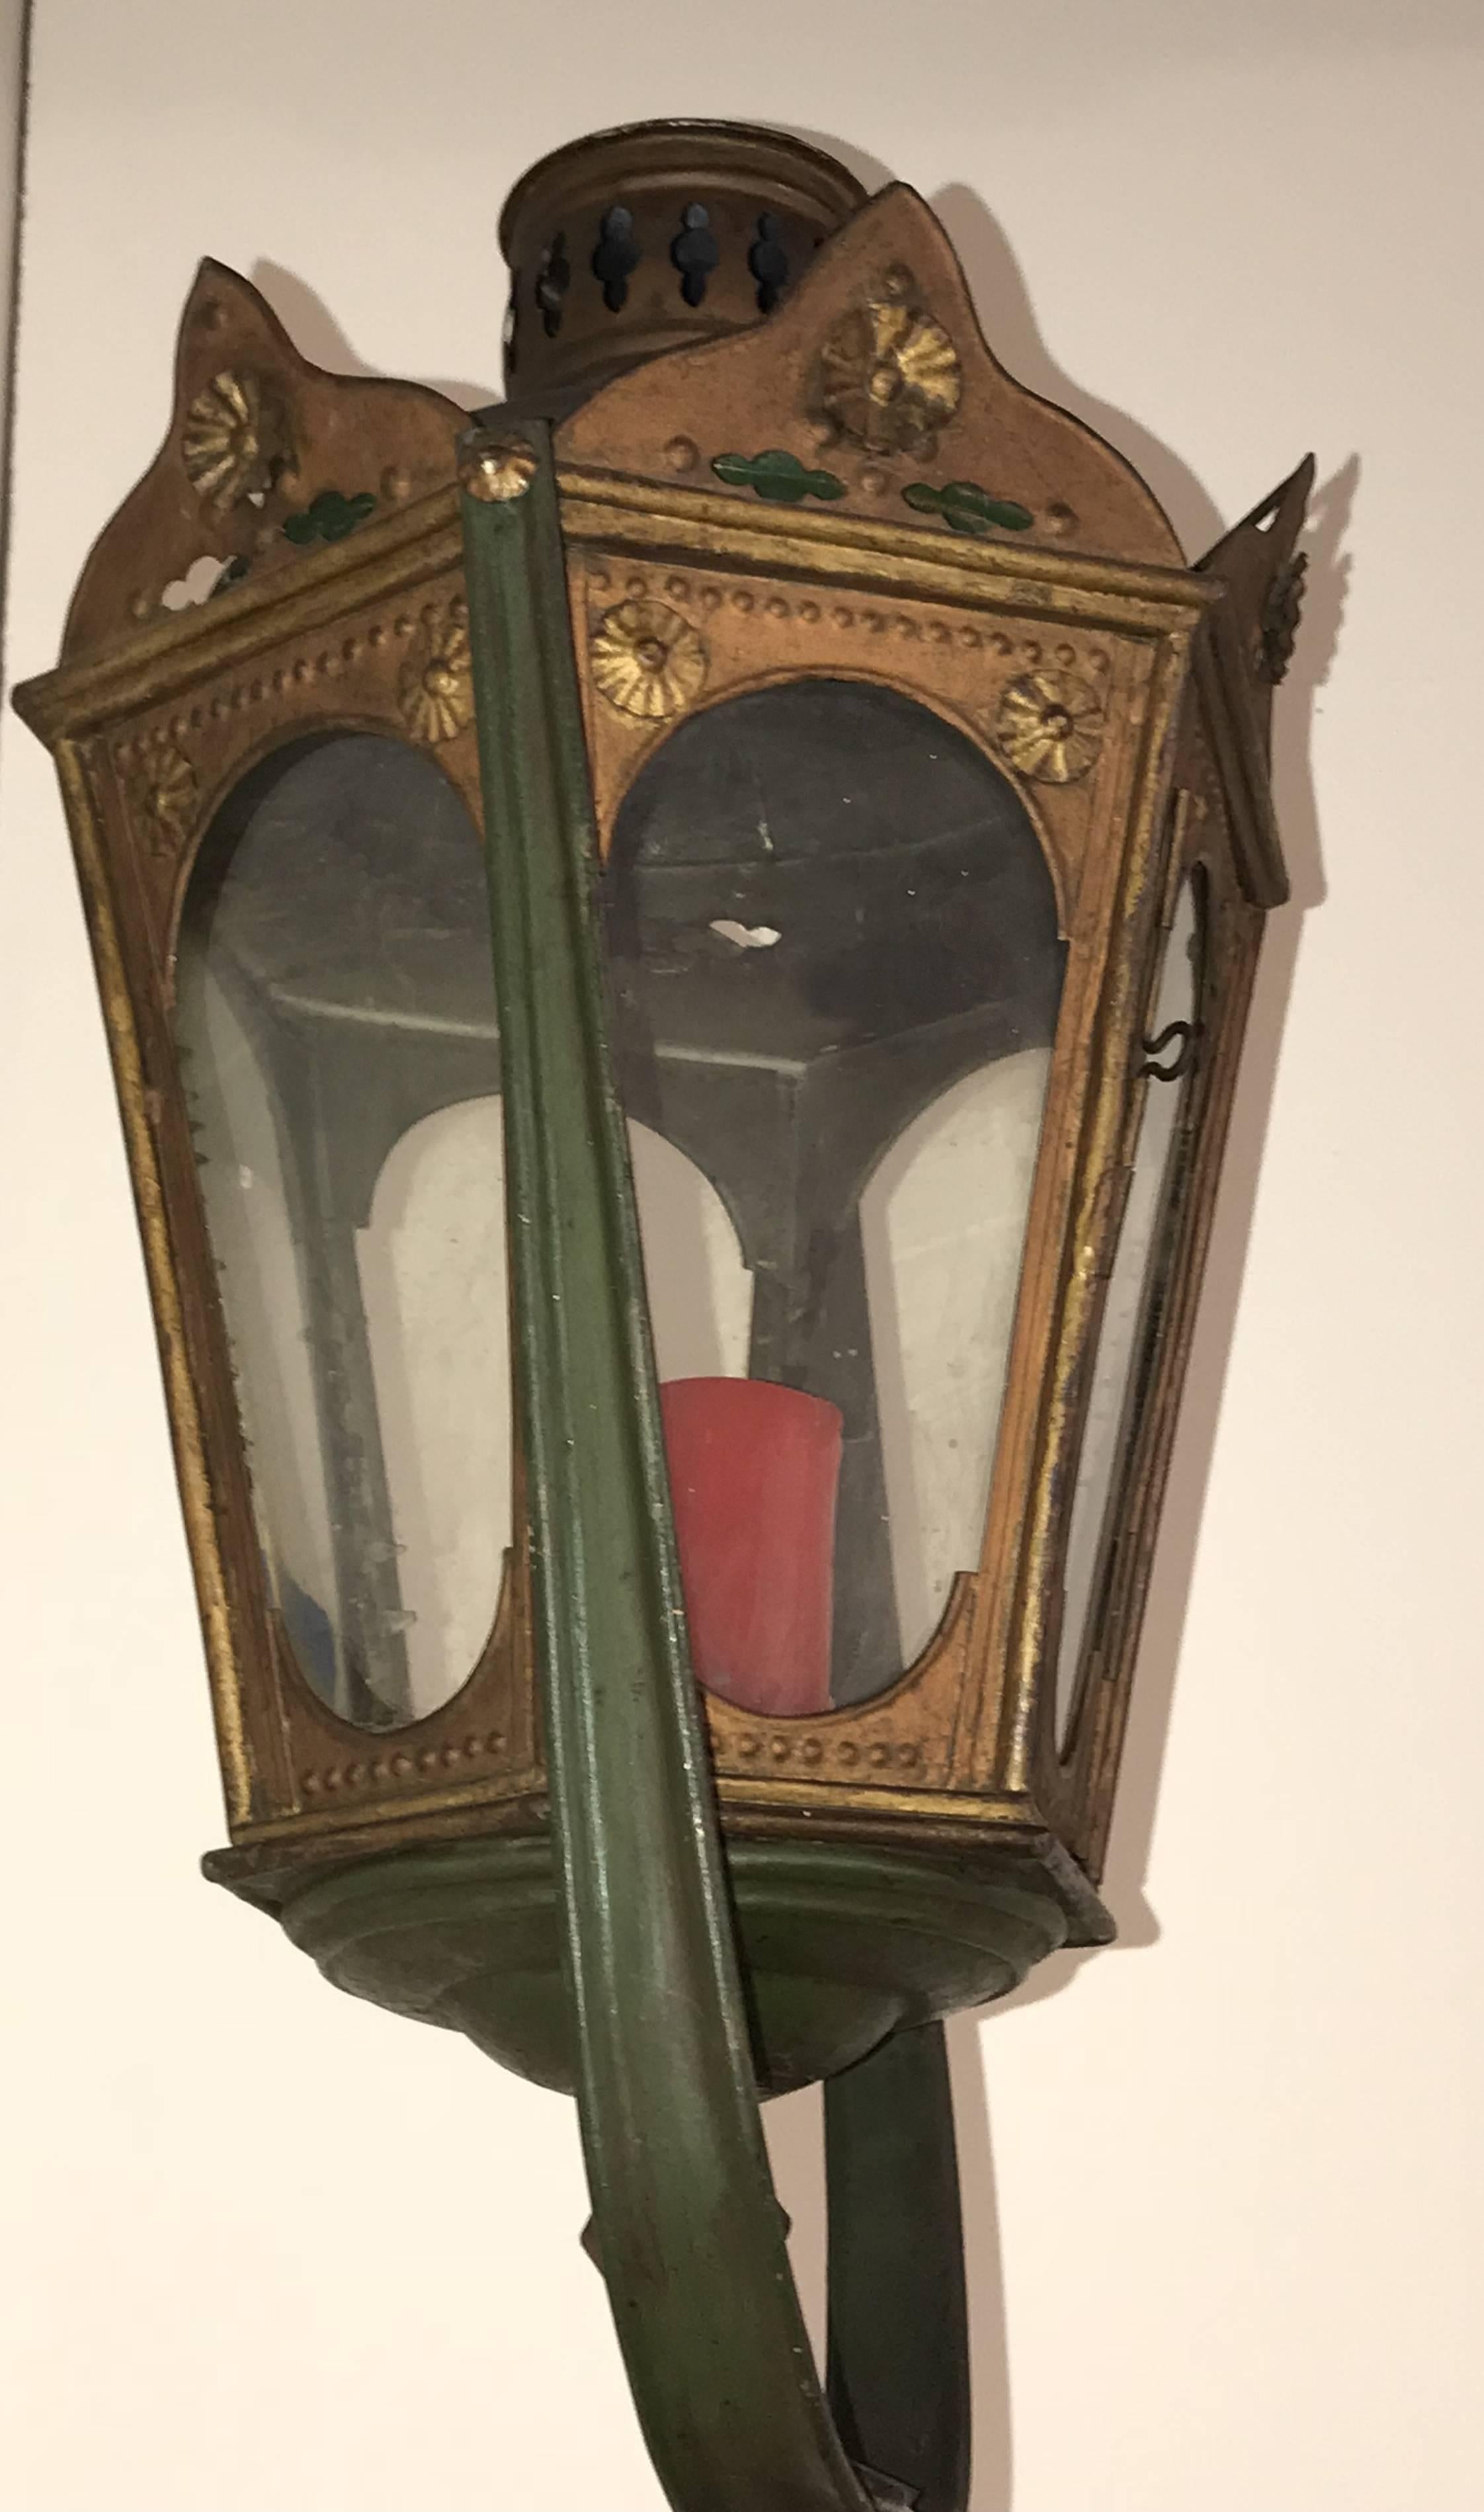 Hand-Crafted 19th Century Italian or Venetian Gondola Lamp in Old Color For Sale